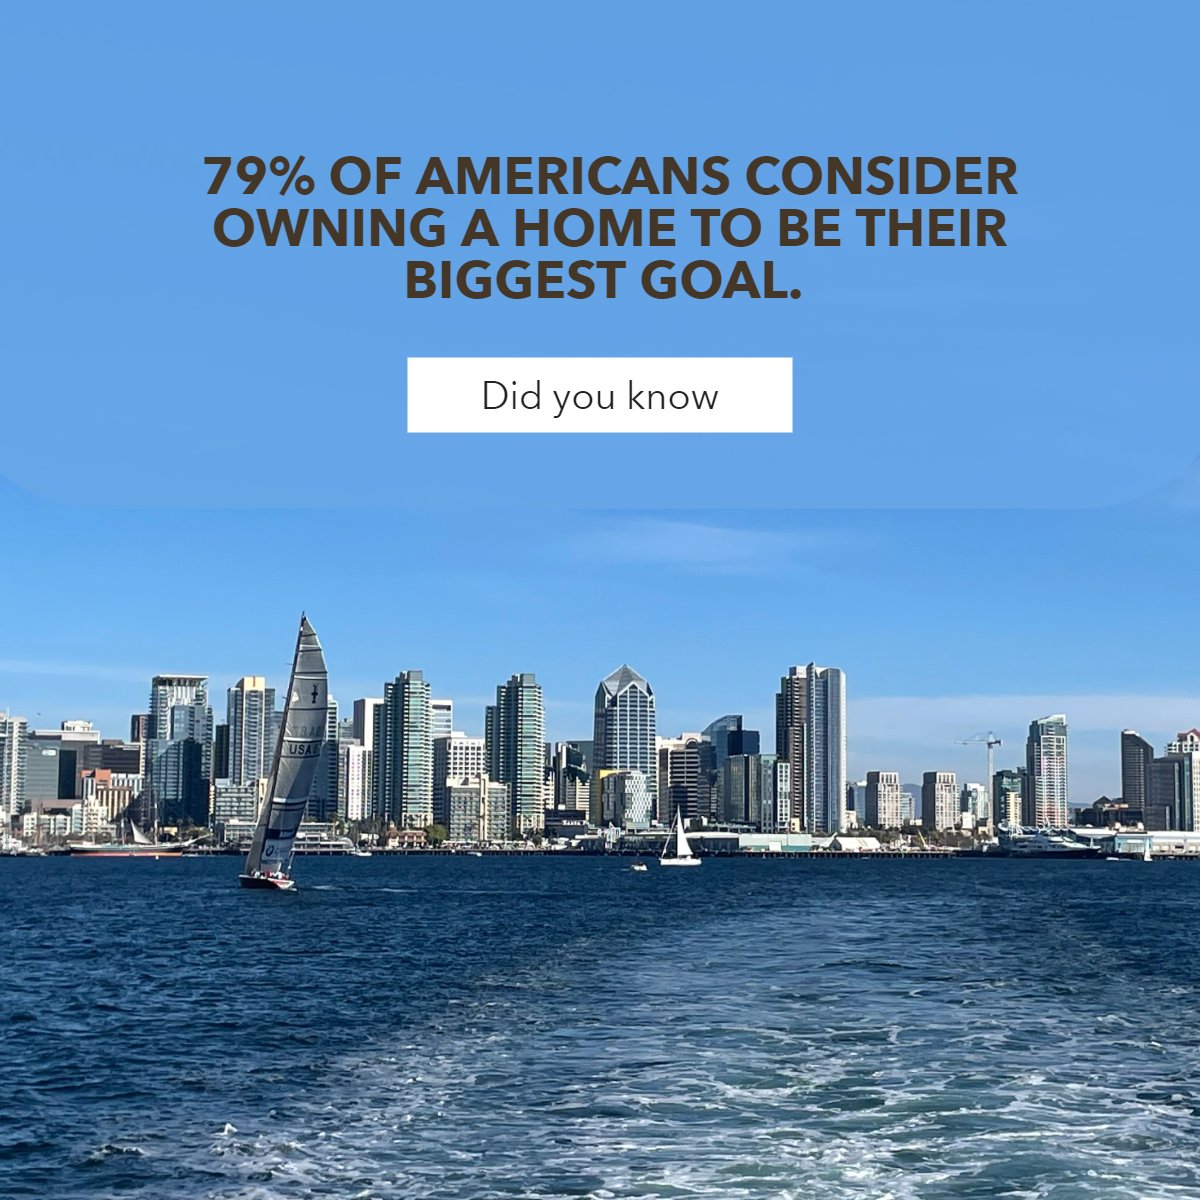 What do you consider your biggest goal? 🤔

Let us know in the comments below!

#owningahome     #americans     #realestatefact      #didyouknow     #didyouknowfacts 

#riscosells #theriscogroup #kwmainline #Uptownliving